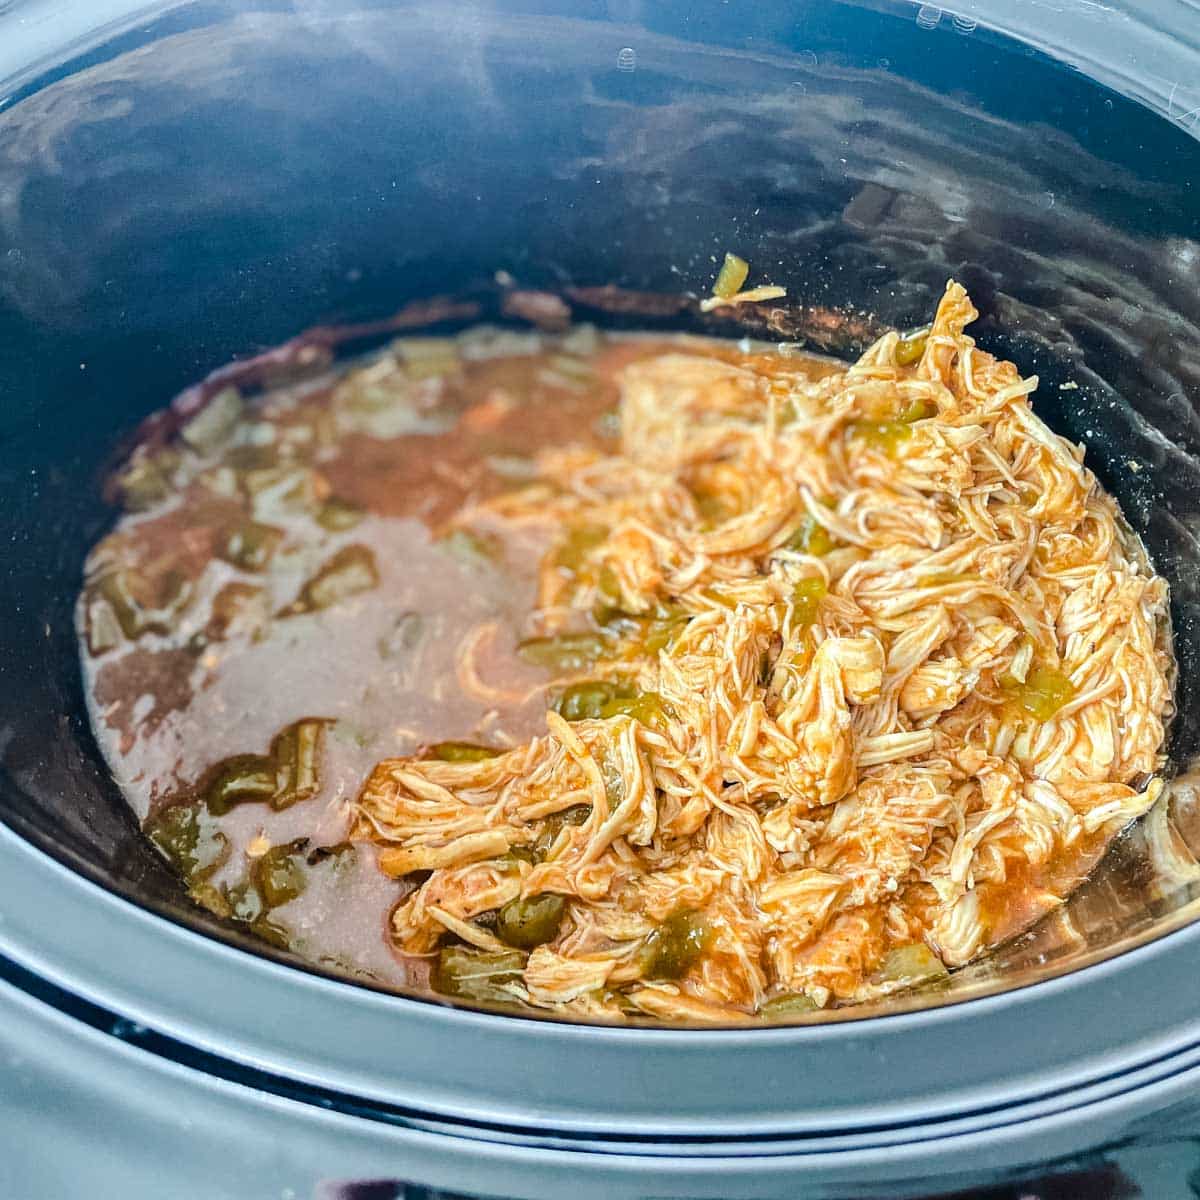 Shredded chicken is added back to the crockpot.